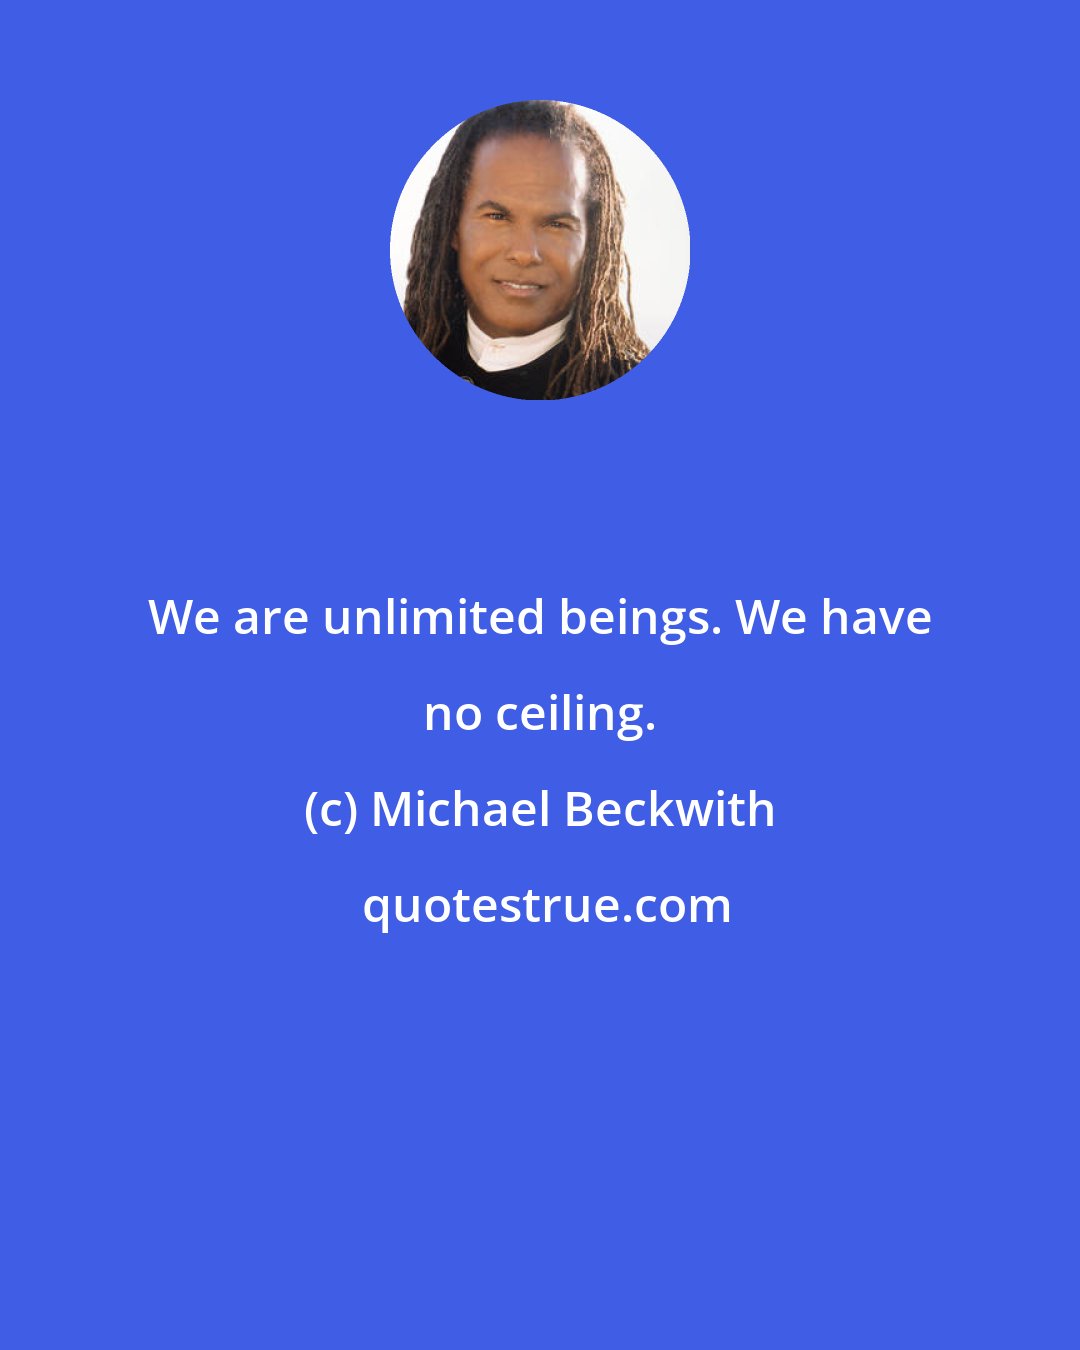 Michael Beckwith: We are unlimited beings. We have no ceiling.